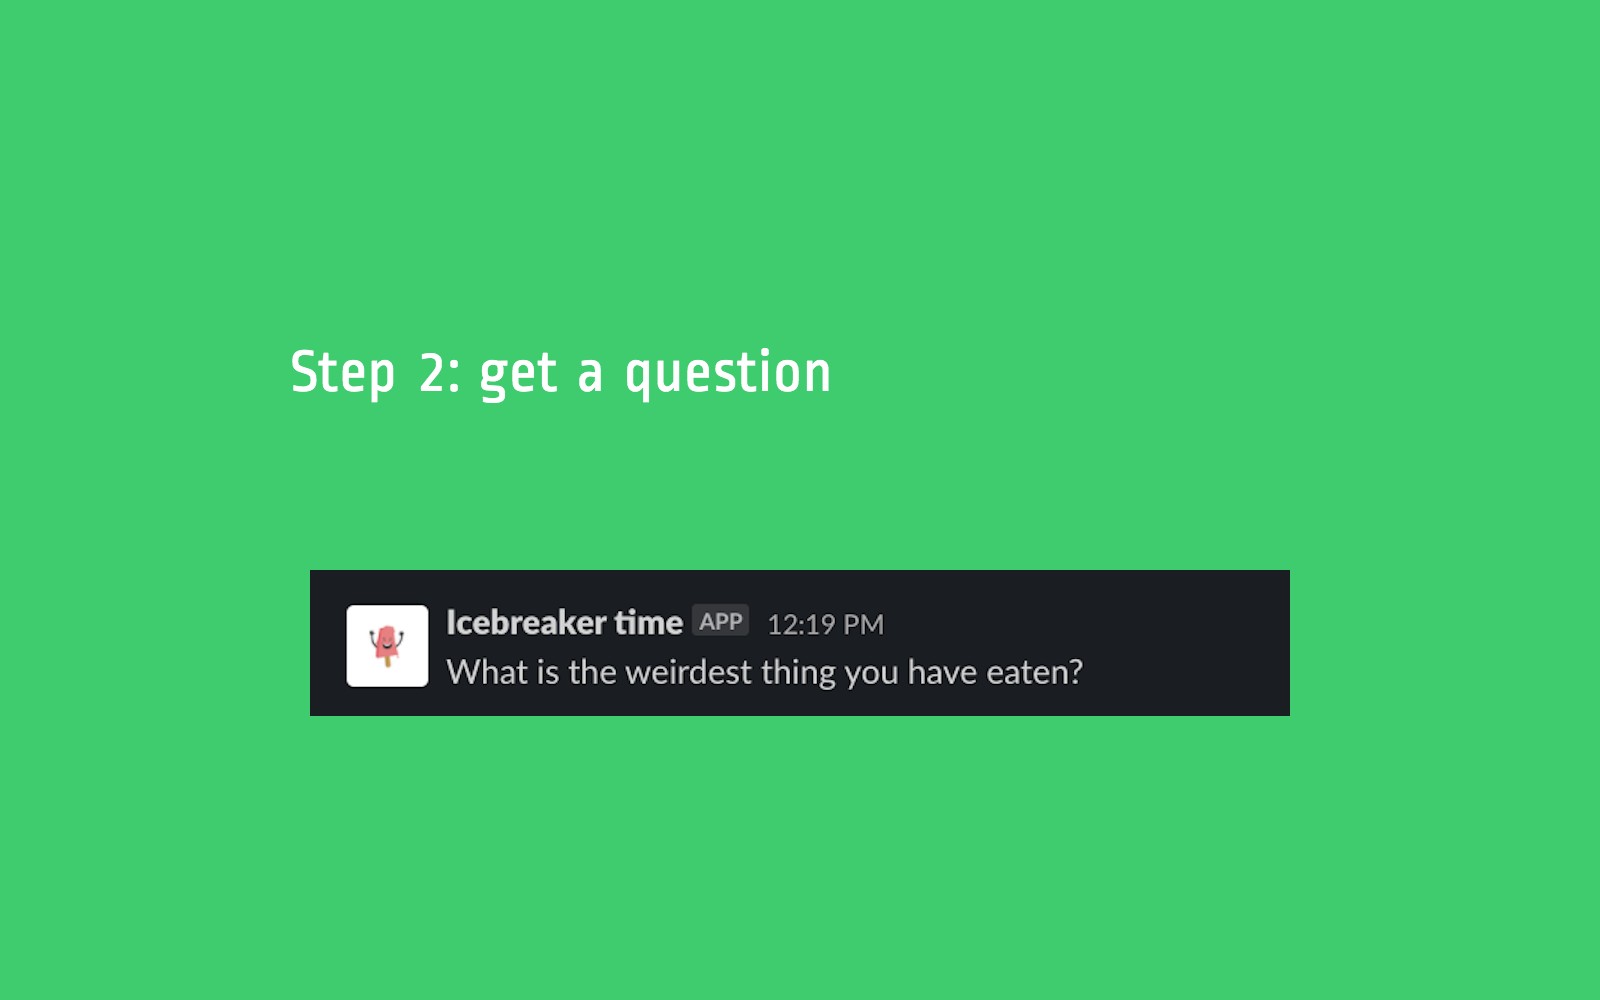 Get feedback from a vast remote working audience about Icebreaker time!